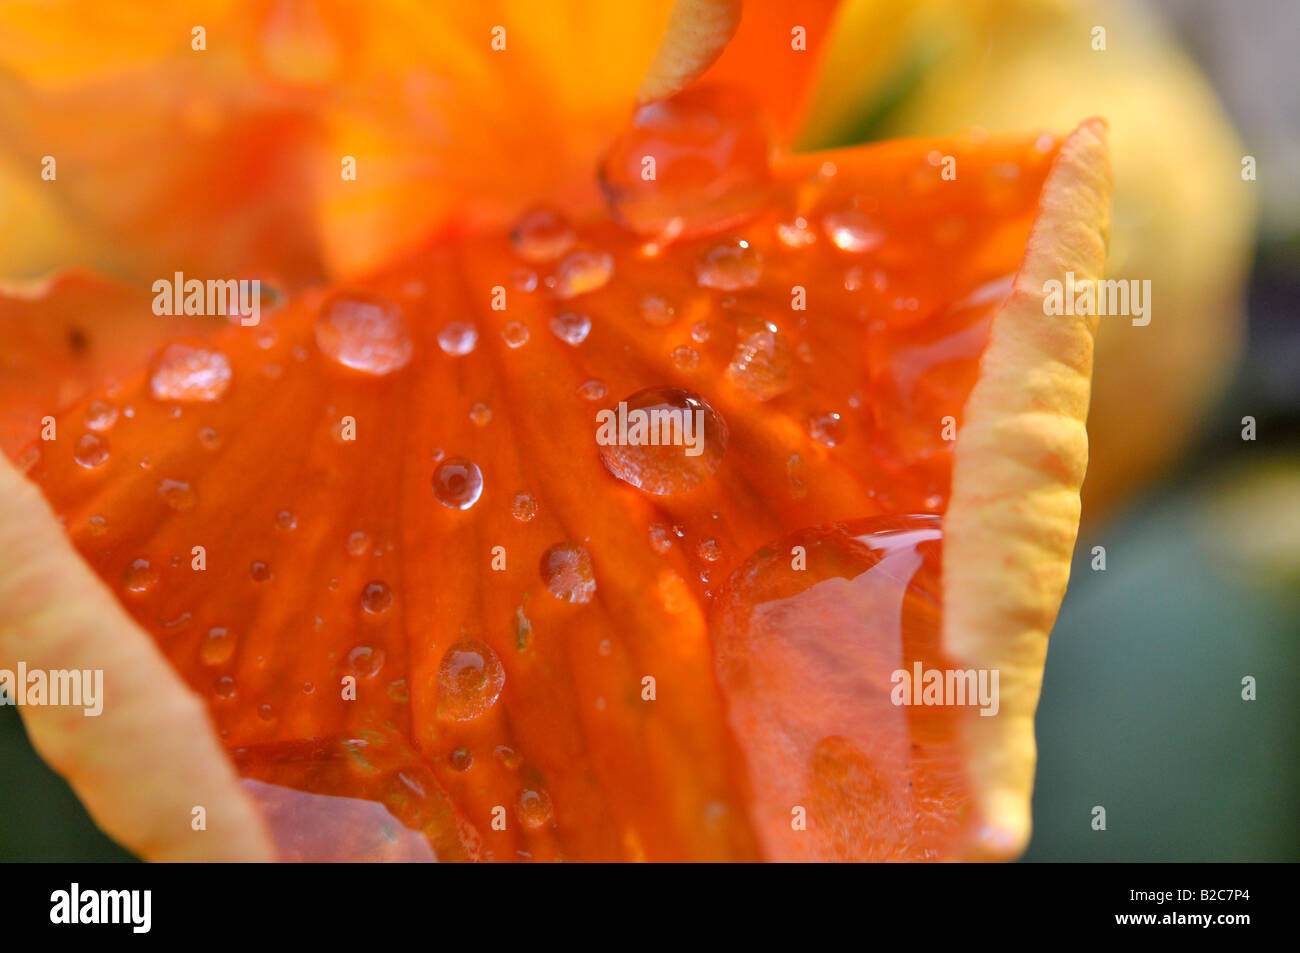 Drops of water on a petal Stock Photo